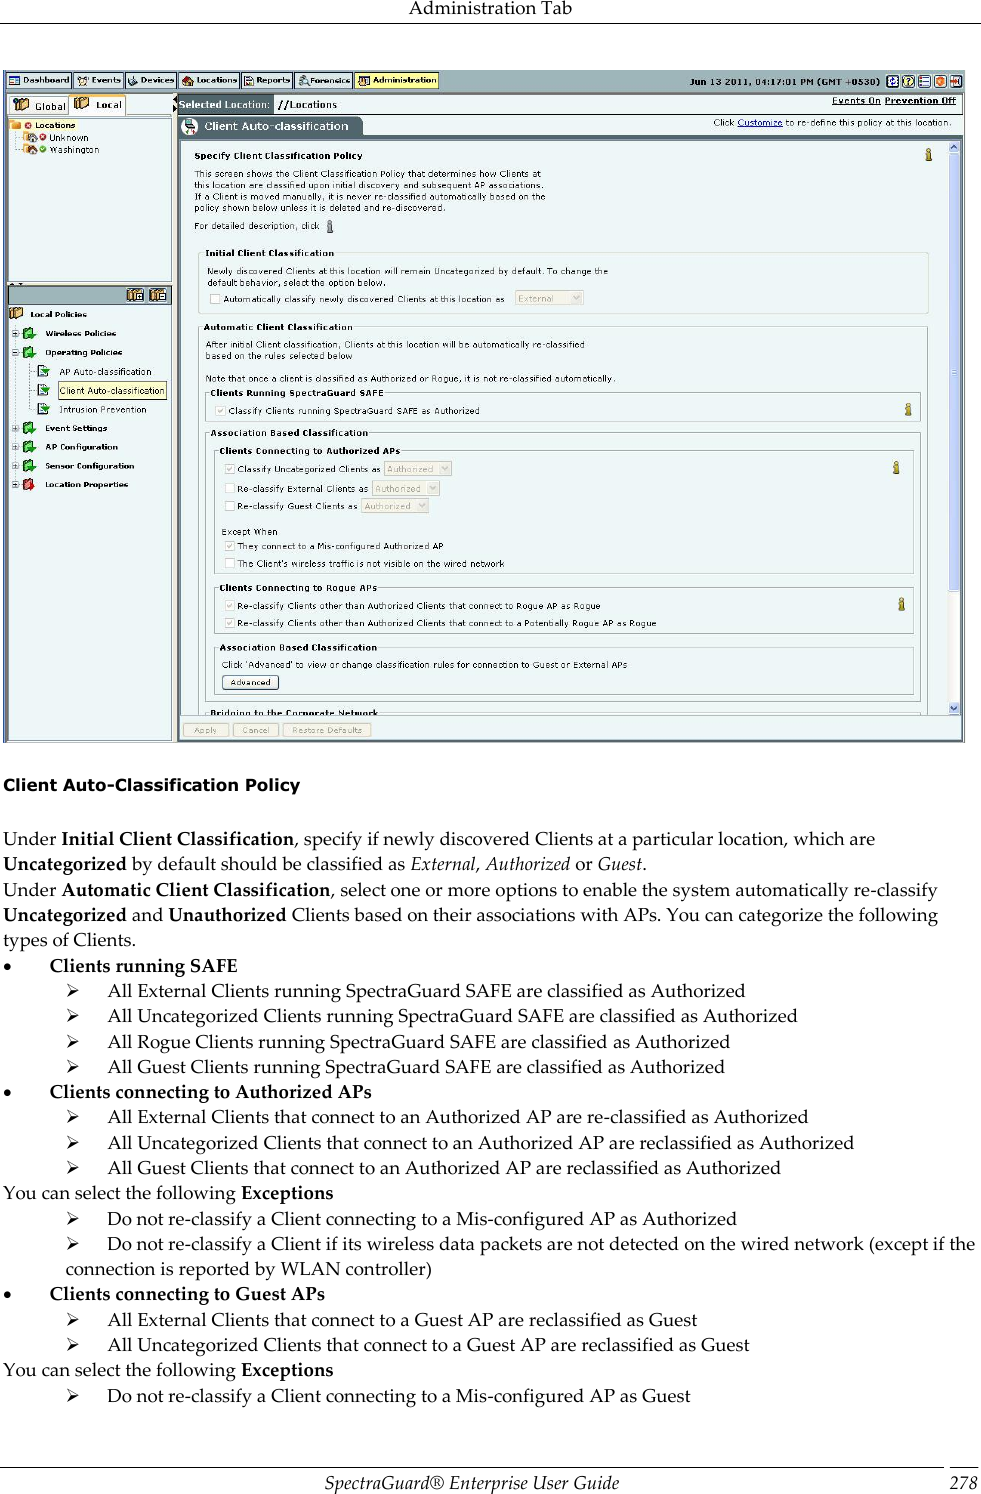 Administration Tab SpectraGuard®  Enterprise User Guide 278    Client Auto-Classification Policy   Under Initial Client Classification, specify if newly discovered Clients at a particular location, which are Uncategorized by default should be classified as External, Authorized or Guest. Under Automatic Client Classification, select one or more options to enable the system automatically re-classify Uncategorized and Unauthorized Clients based on their associations with APs. You can categorize the following types of Clients.           Clients running SAFE        All External Clients running SpectraGuard SAFE are classified as Authorized        All Uncategorized Clients running SpectraGuard SAFE are classified as Authorized        All Rogue Clients running SpectraGuard SAFE are classified as Authorized        All Guest Clients running SpectraGuard SAFE are classified as Authorized           Clients connecting to Authorized APs        All External Clients that connect to an Authorized AP are re-classified as Authorized        All Uncategorized Clients that connect to an Authorized AP are reclassified as Authorized        All Guest Clients that connect to an Authorized AP are reclassified as Authorized You can select the following Exceptions        Do not re-classify a Client connecting to a Mis-configured AP as Authorized        Do not re-classify a Client if its wireless data packets are not detected on the wired network (except if the connection is reported by WLAN controller)           Clients connecting to Guest APs        All External Clients that connect to a Guest AP are reclassified as Guest        All Uncategorized Clients that connect to a Guest AP are reclassified as Guest You can select the following Exceptions        Do not re-classify a Client connecting to a Mis-configured AP as Guest 